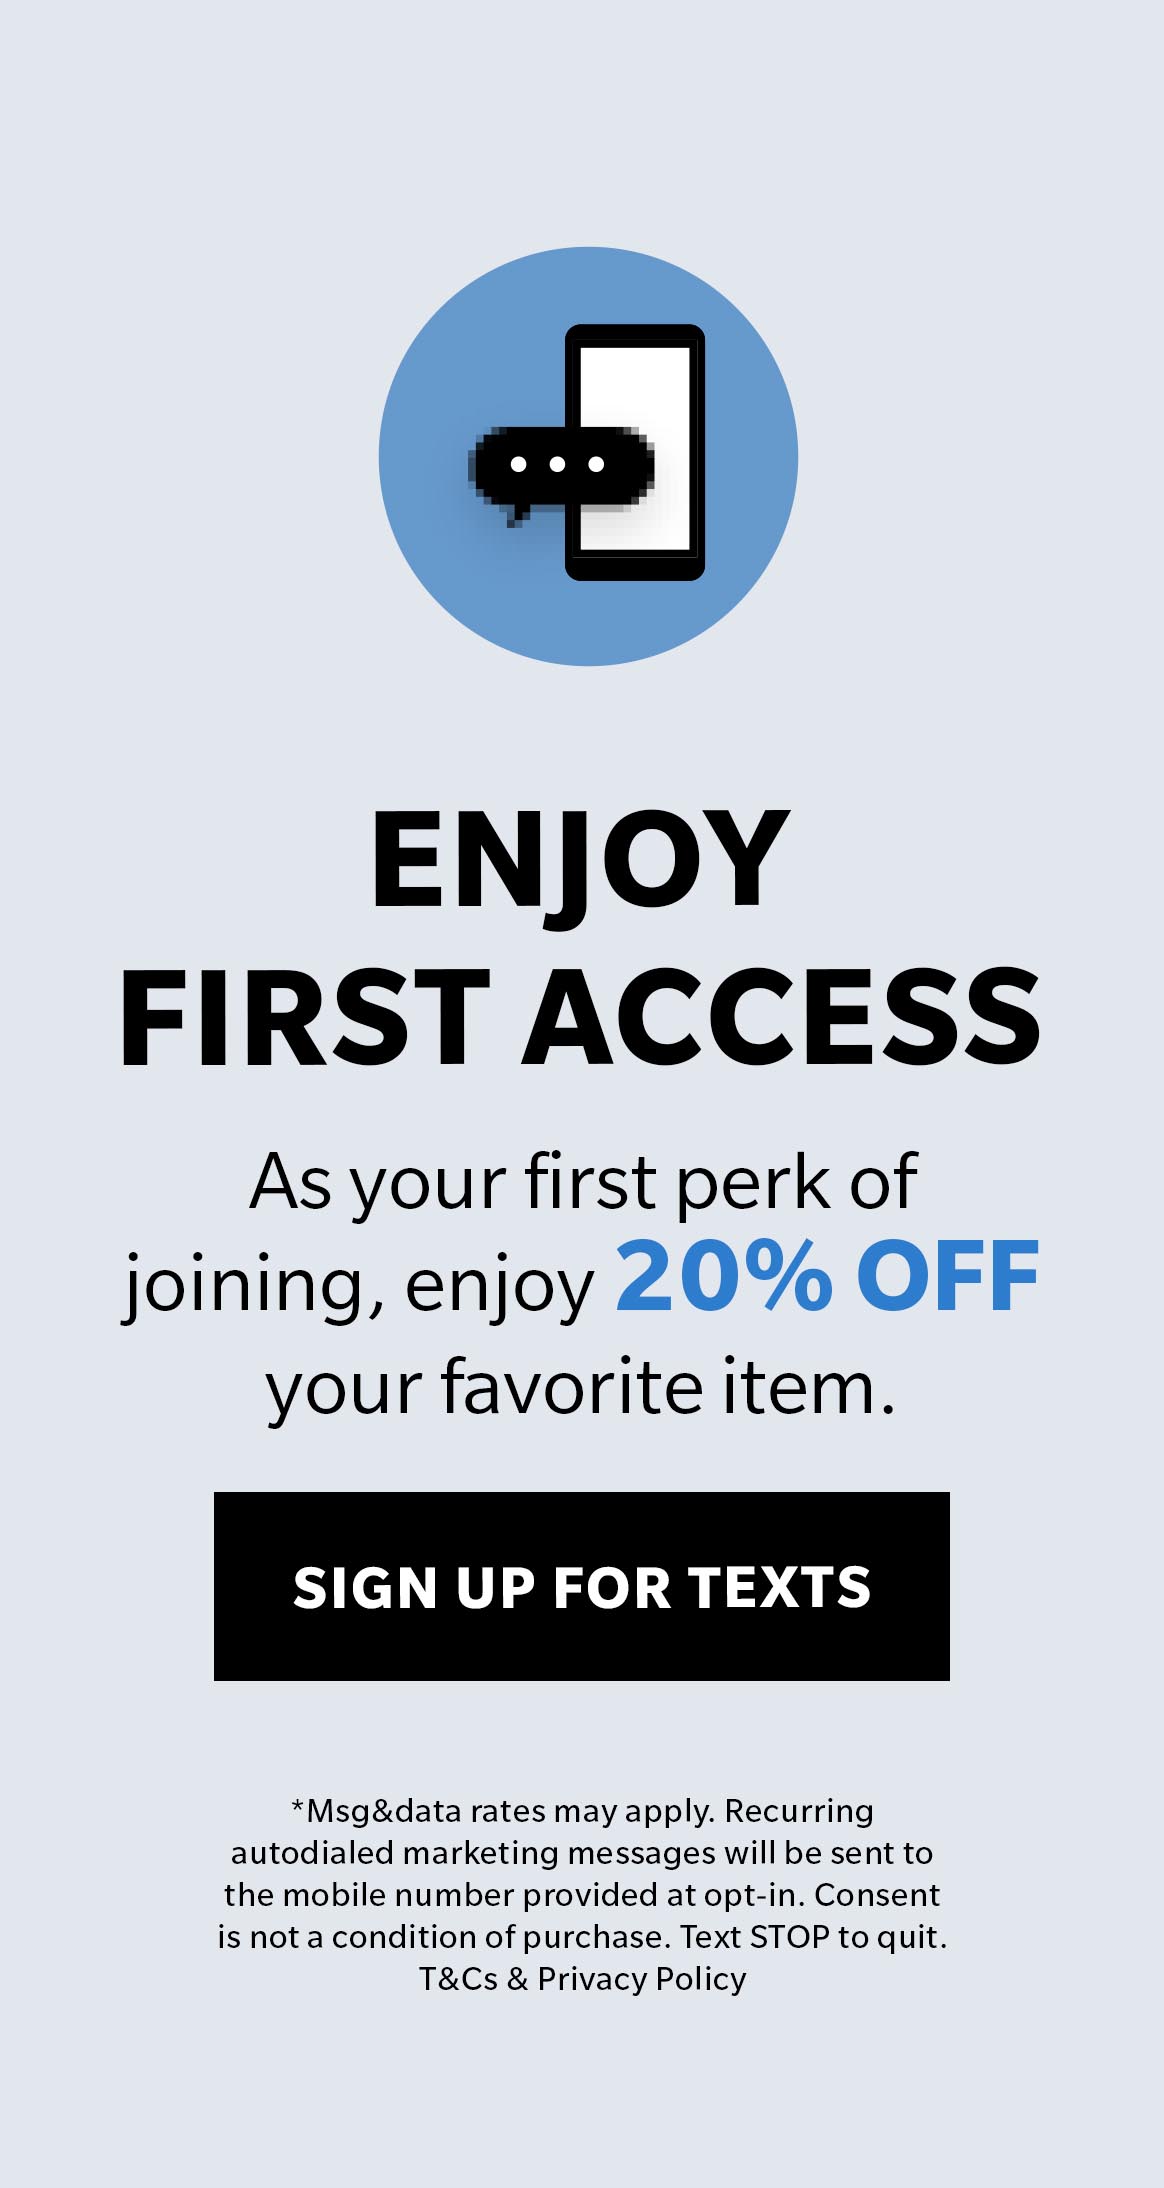 Enjoy First Access to special offers, new arrivals and more! Sign up for texts.